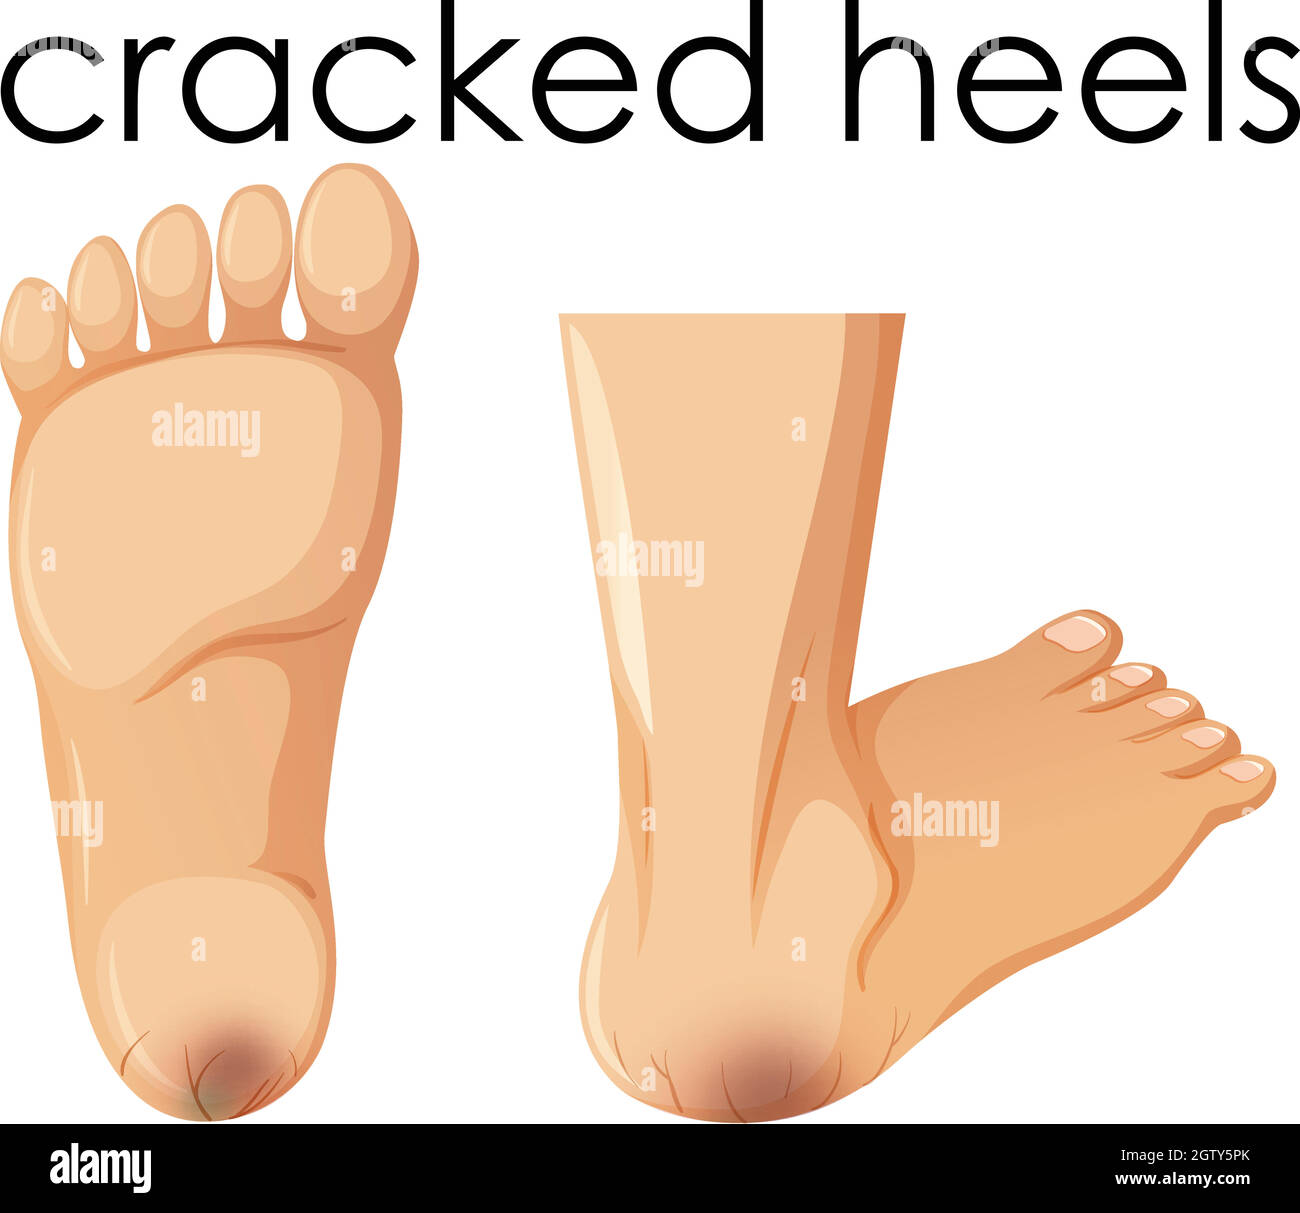 A Set of Human Foot with Cracked Heels Stock Vector